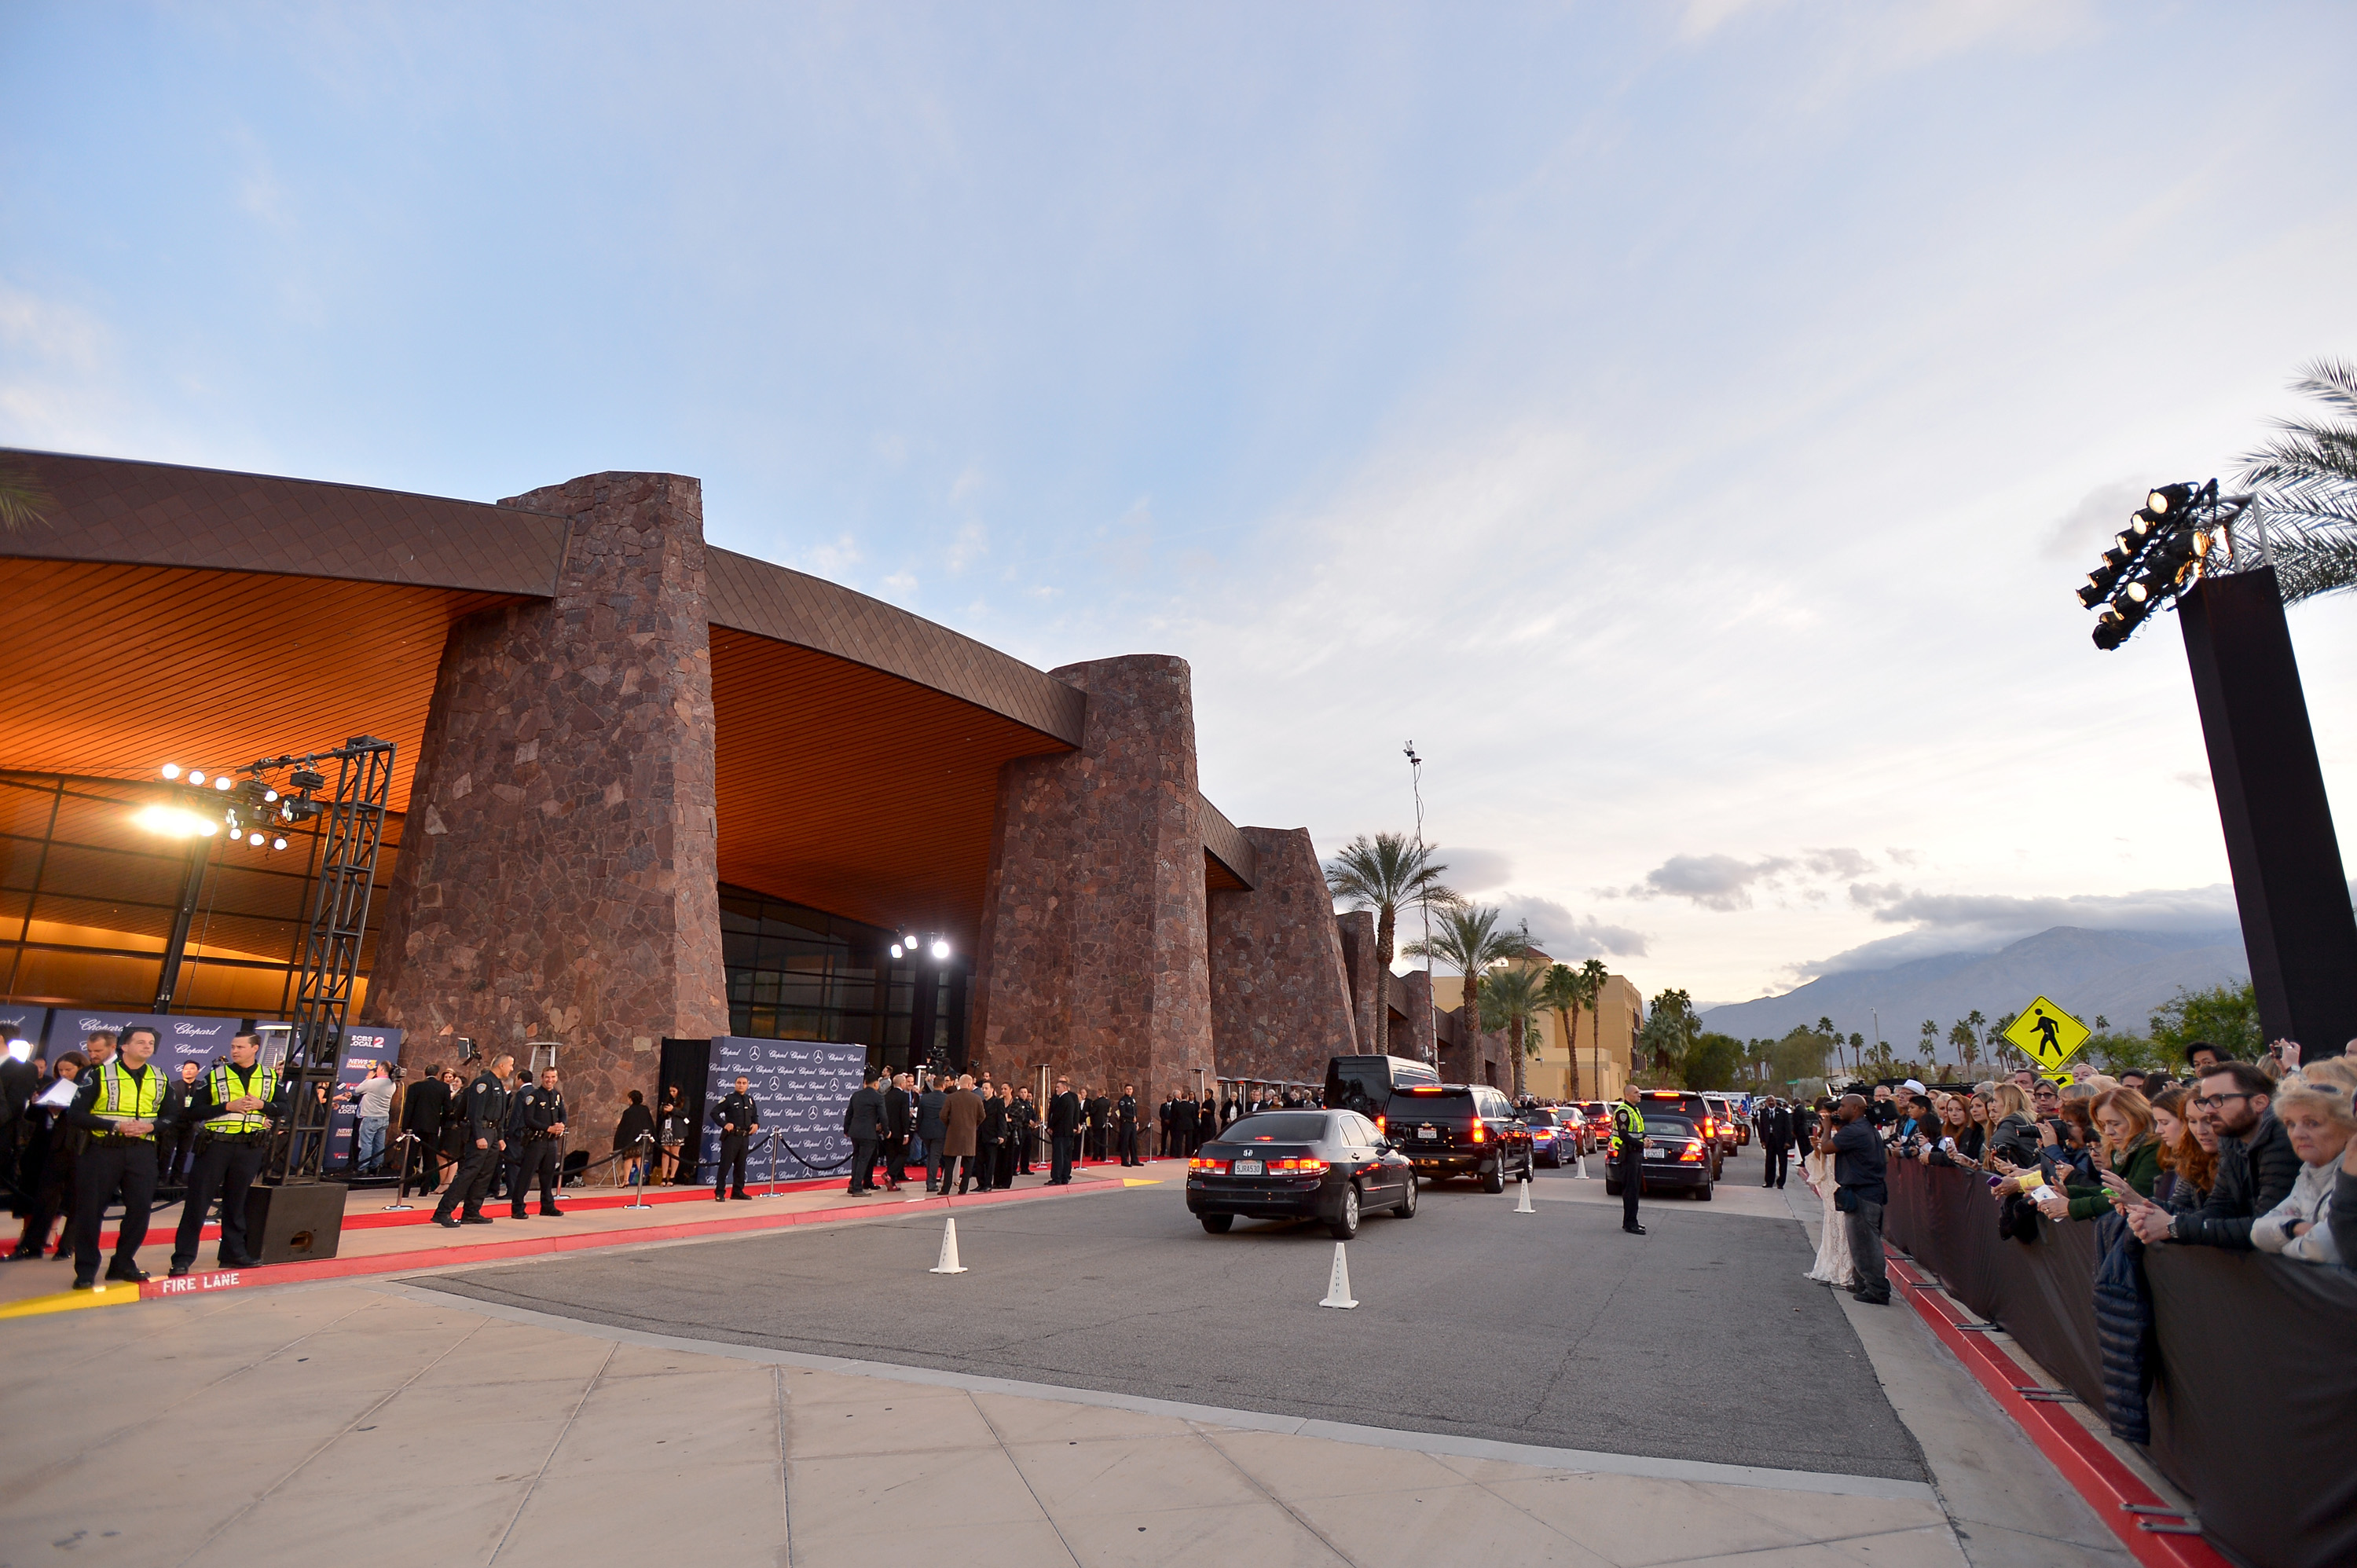 PALM SPRINGS, CA - JANUARY 02: The pre-show atmosphere as seen outside the 28th Annual Palm Springs International Film Festival Film Awards Gala at the Palm Springs Convention Center on January 2, 2017 in Palm Springs, California. (Photo by Charley Gallay/Getty Images for Palm Springs International Film Festival)